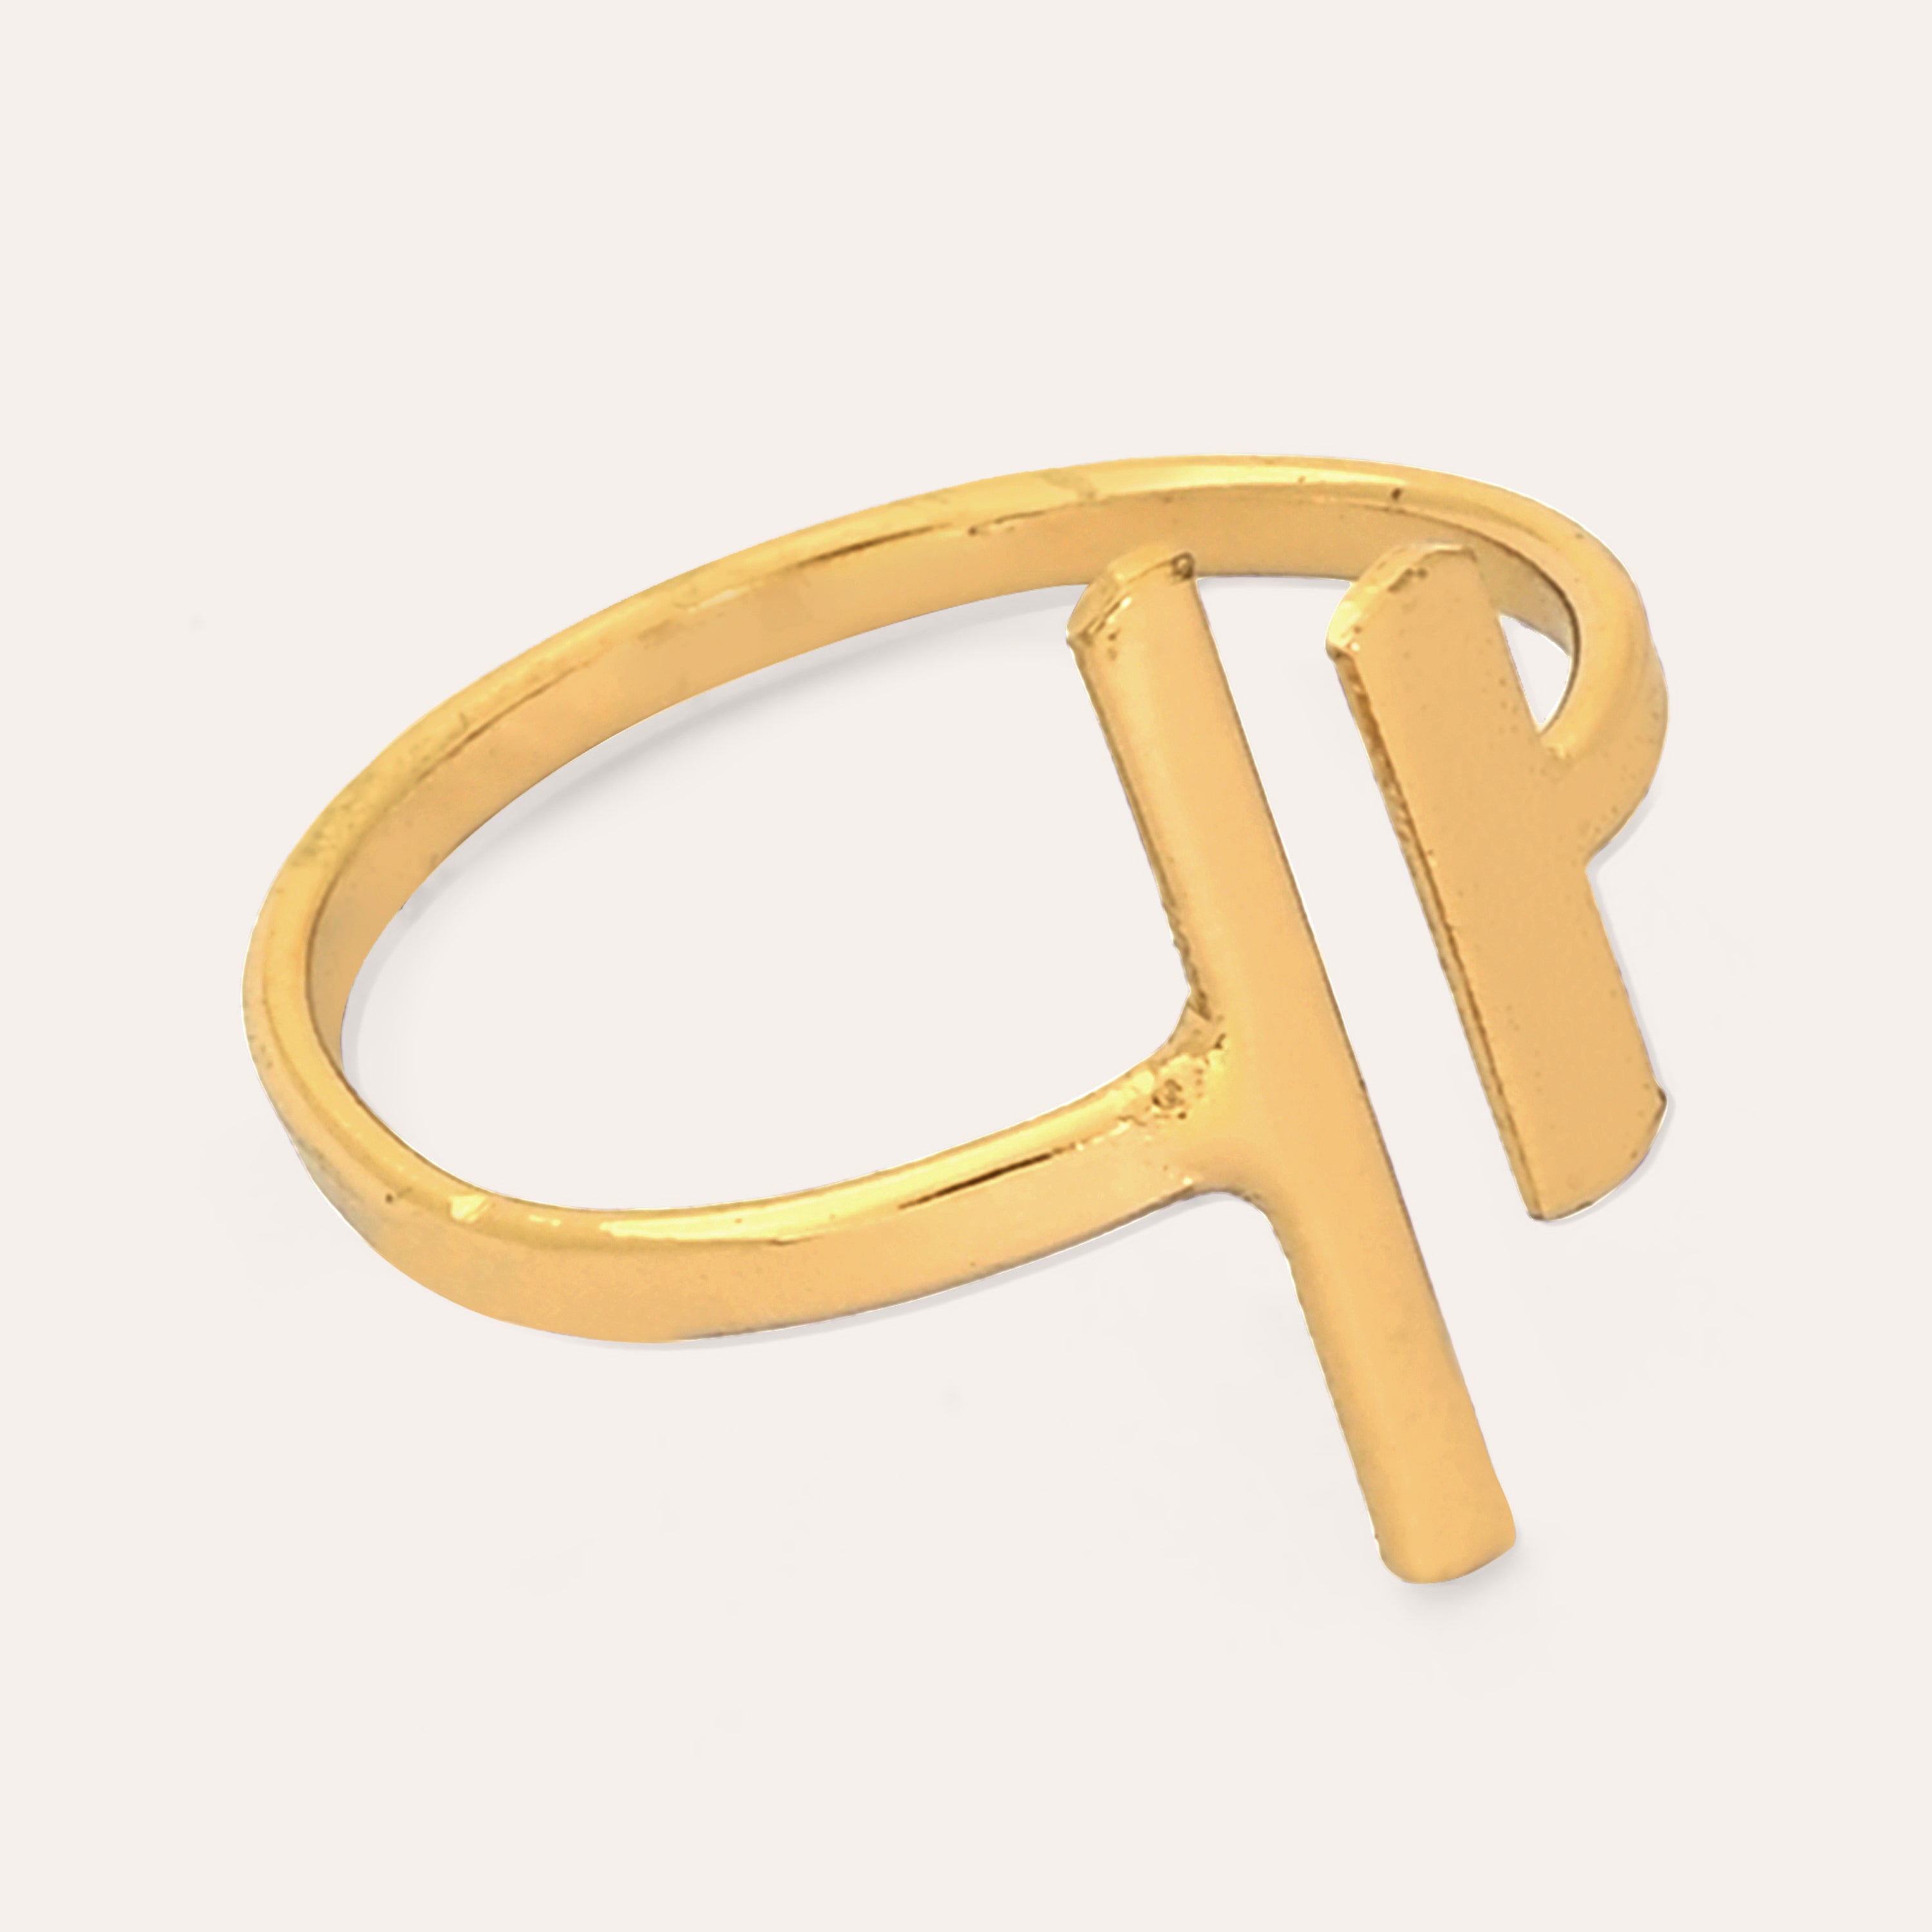 TFC Zipzap gold plated ring-Elevate your style with our exquisite collection of gold-plated adjustable rings for women, including timeless signet rings. Explore cheapest fashion jewellery designs with anti-tarnish properties, all at The Fun Company with a touch of elegance